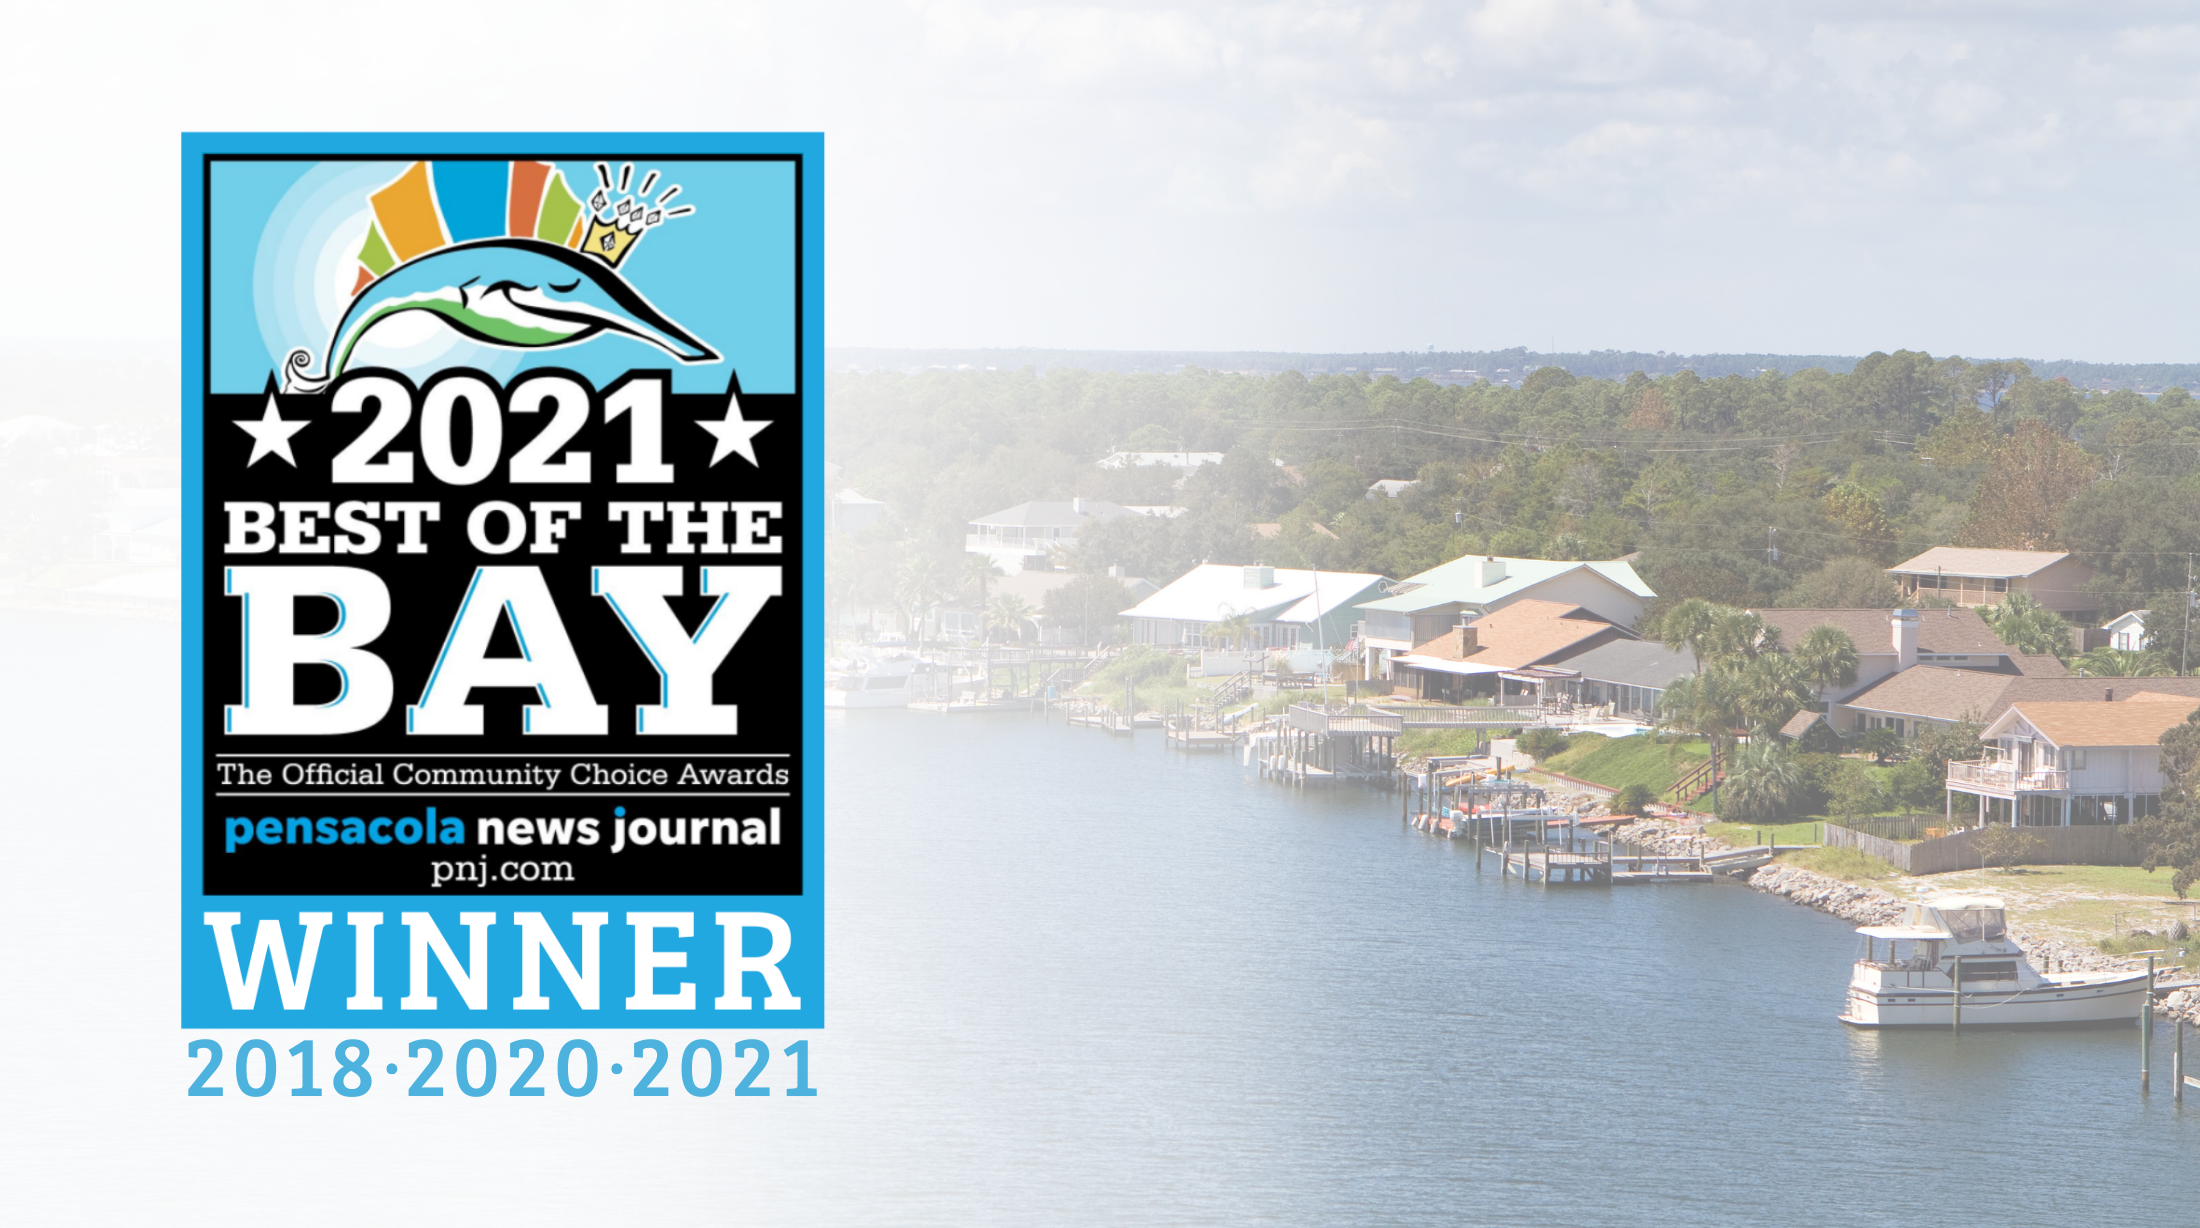 Winners of the 2021 Best of the Bay for Best Home Builder